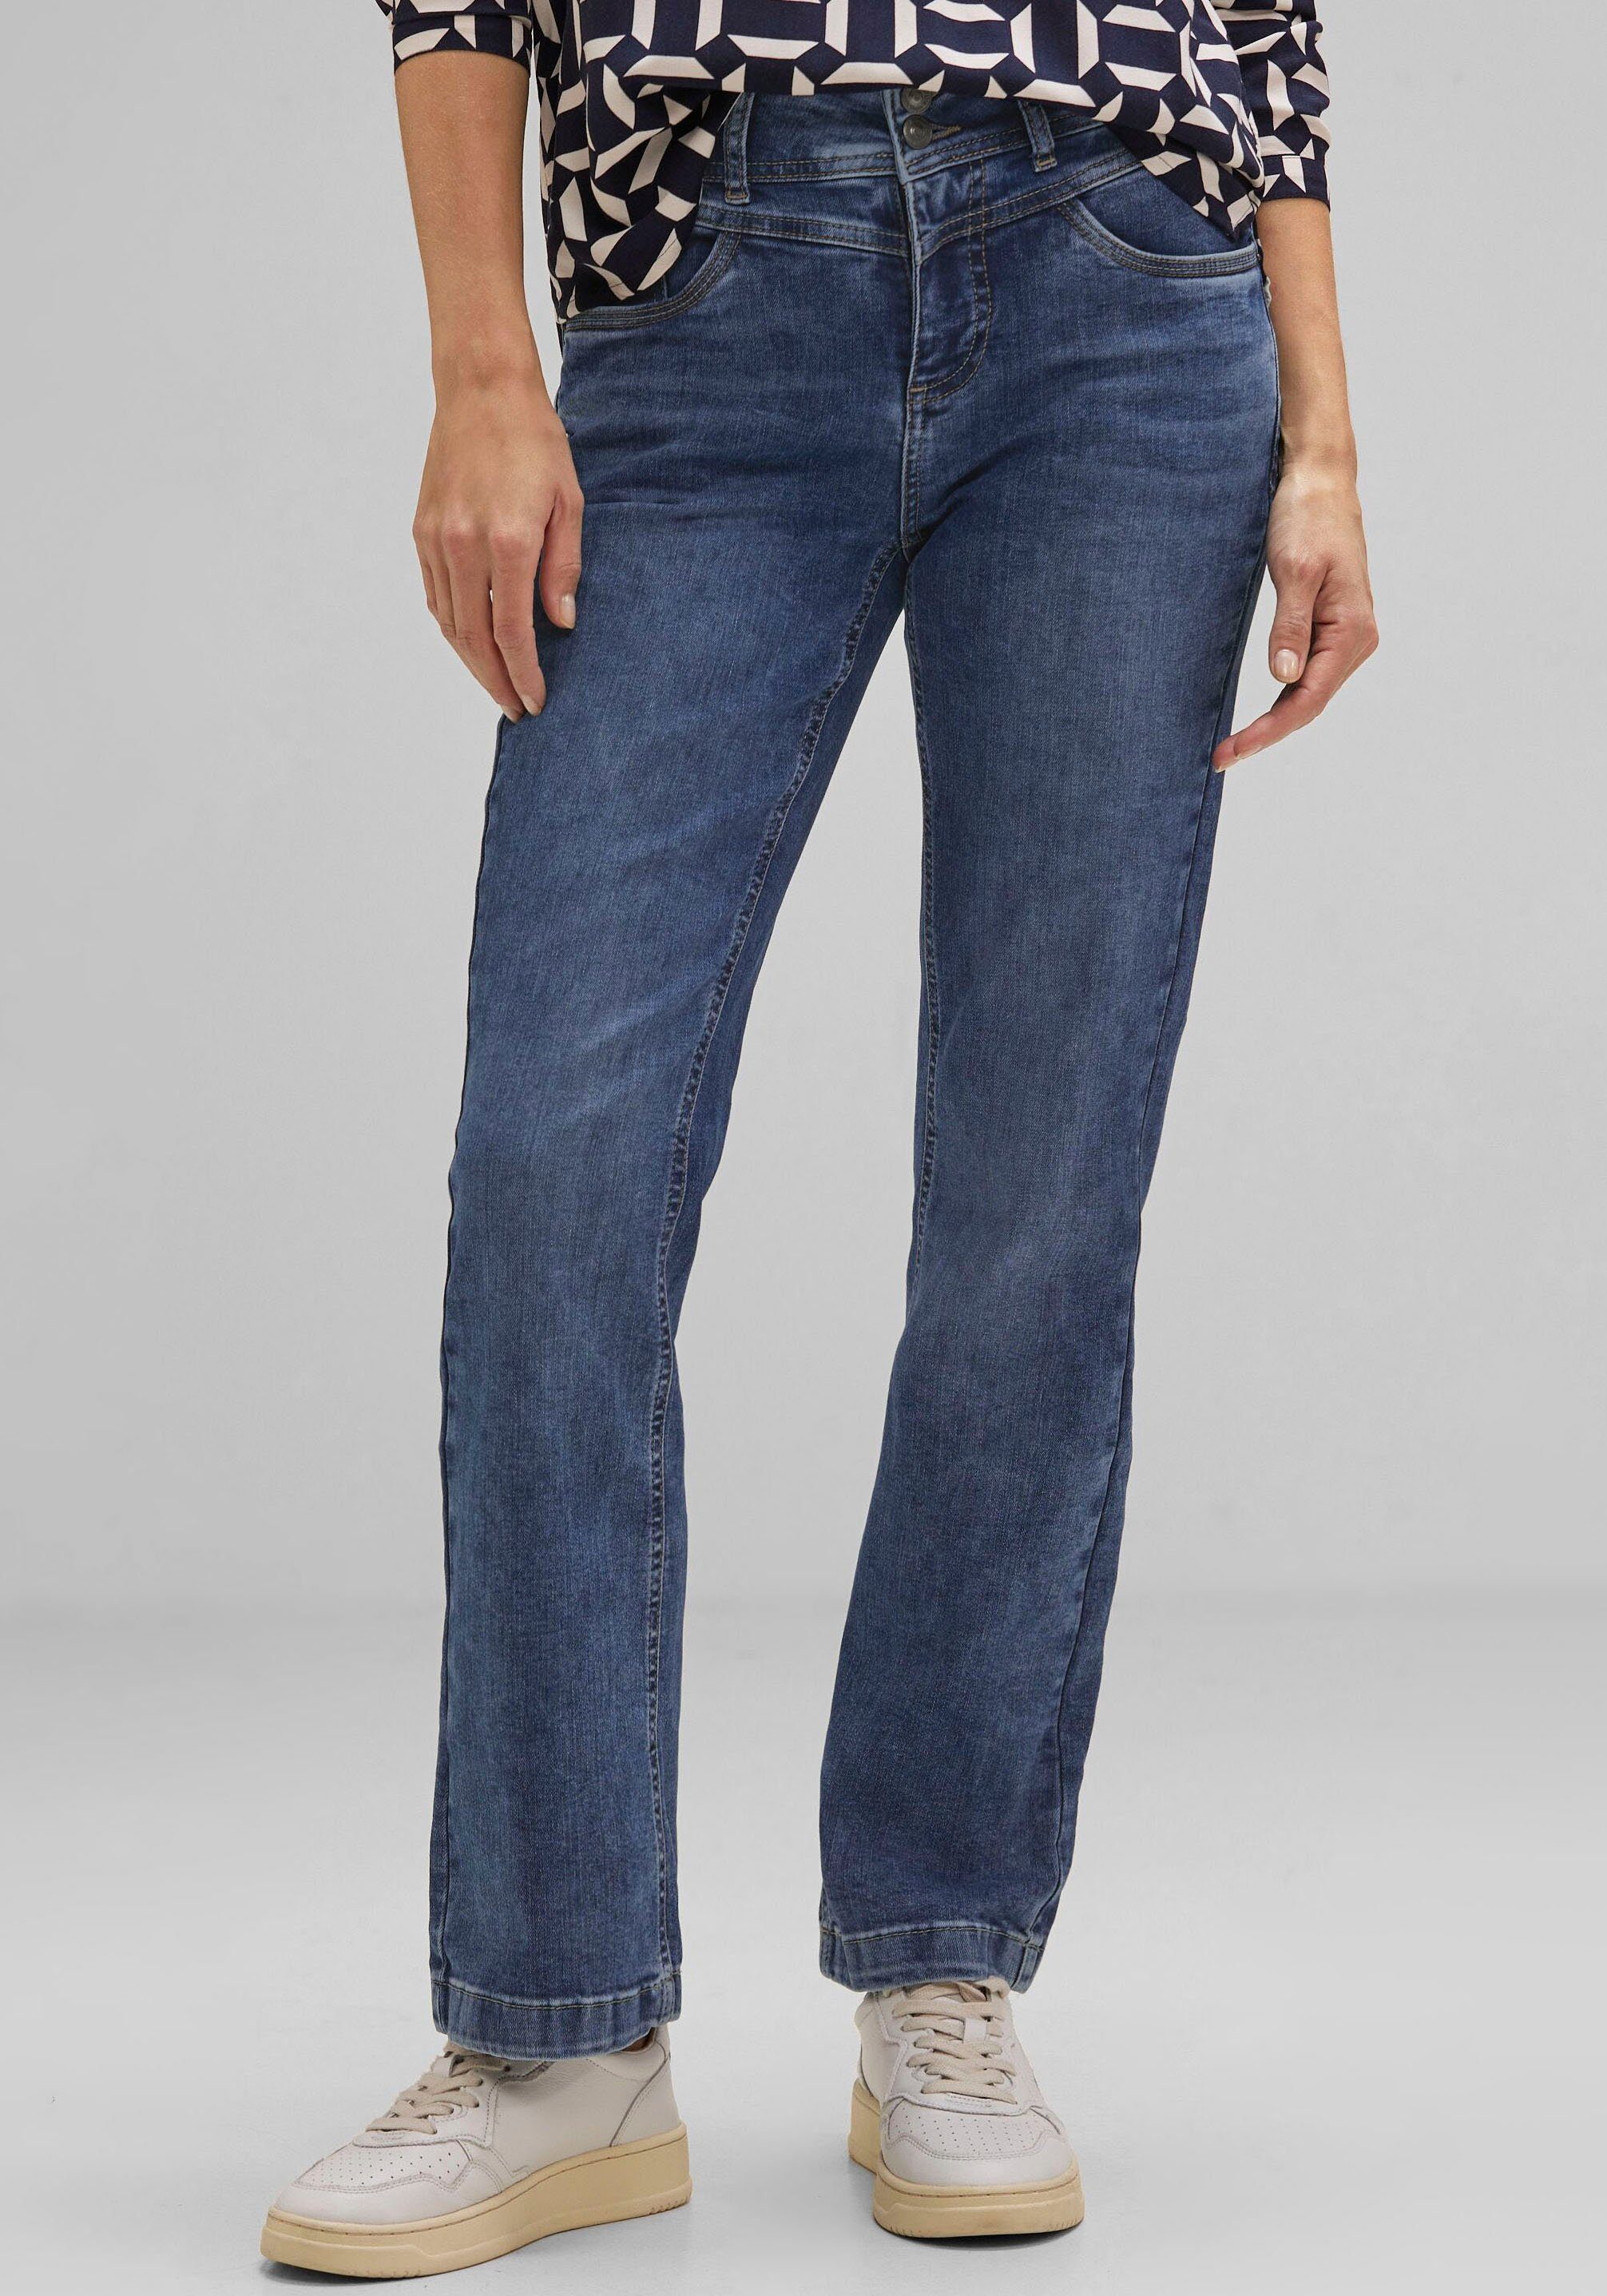 STREET ONE Bootcut-Jeans in hellblauer Waschung